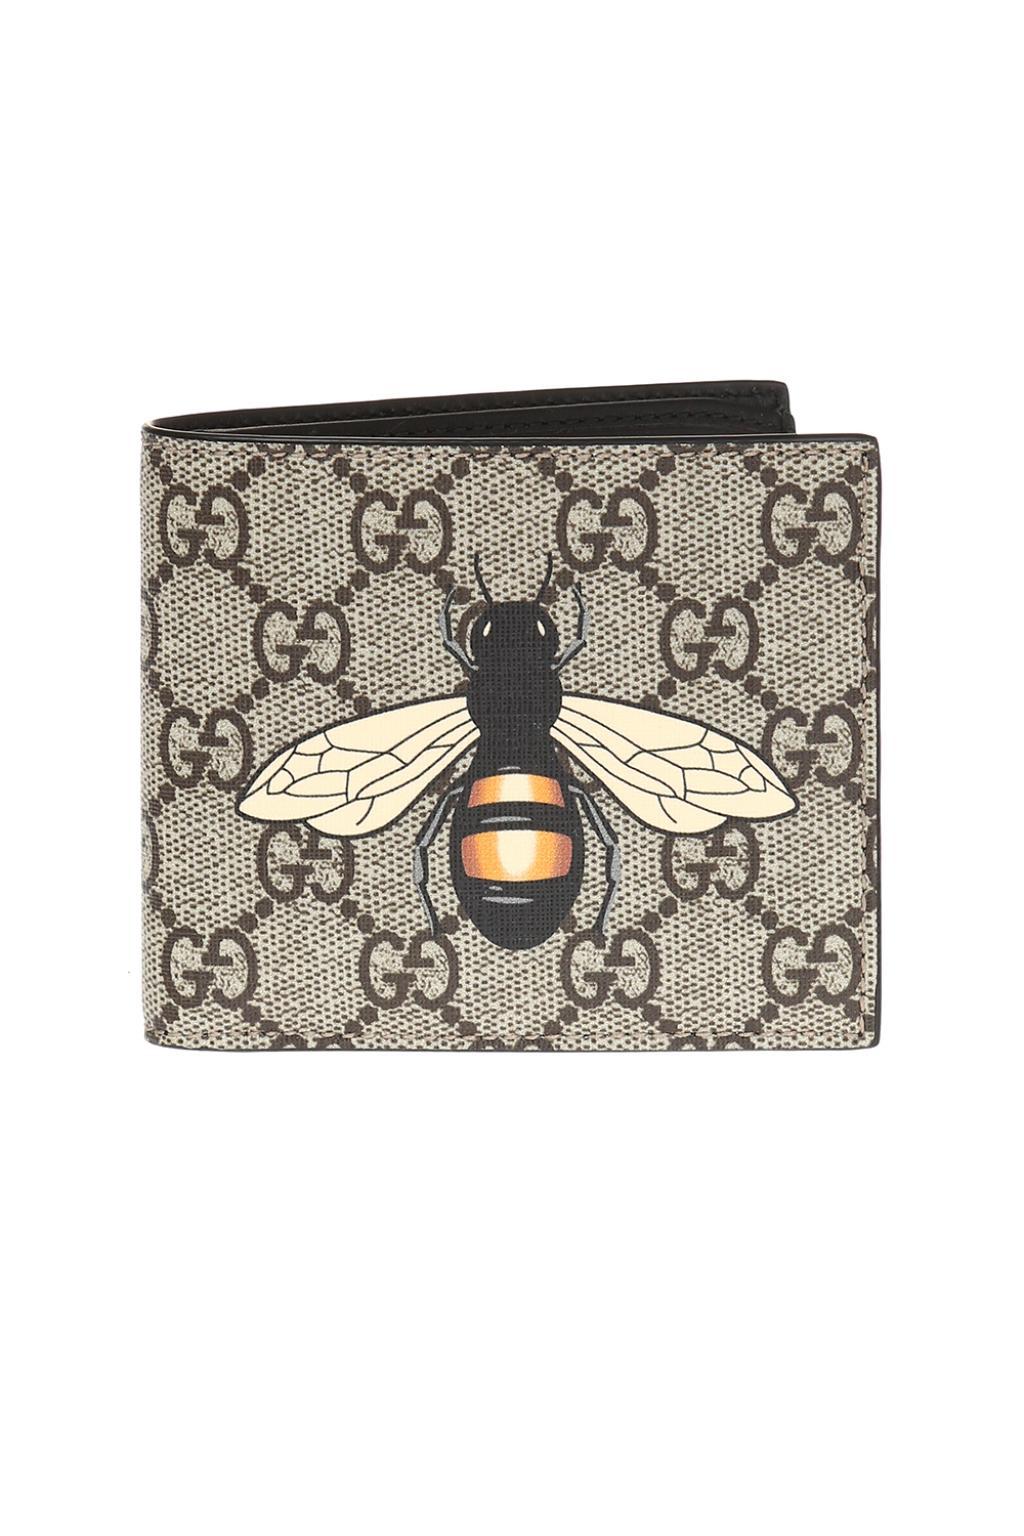 Gucci Canvas Wallet With Bee Motif in Brown for Men - Lyst